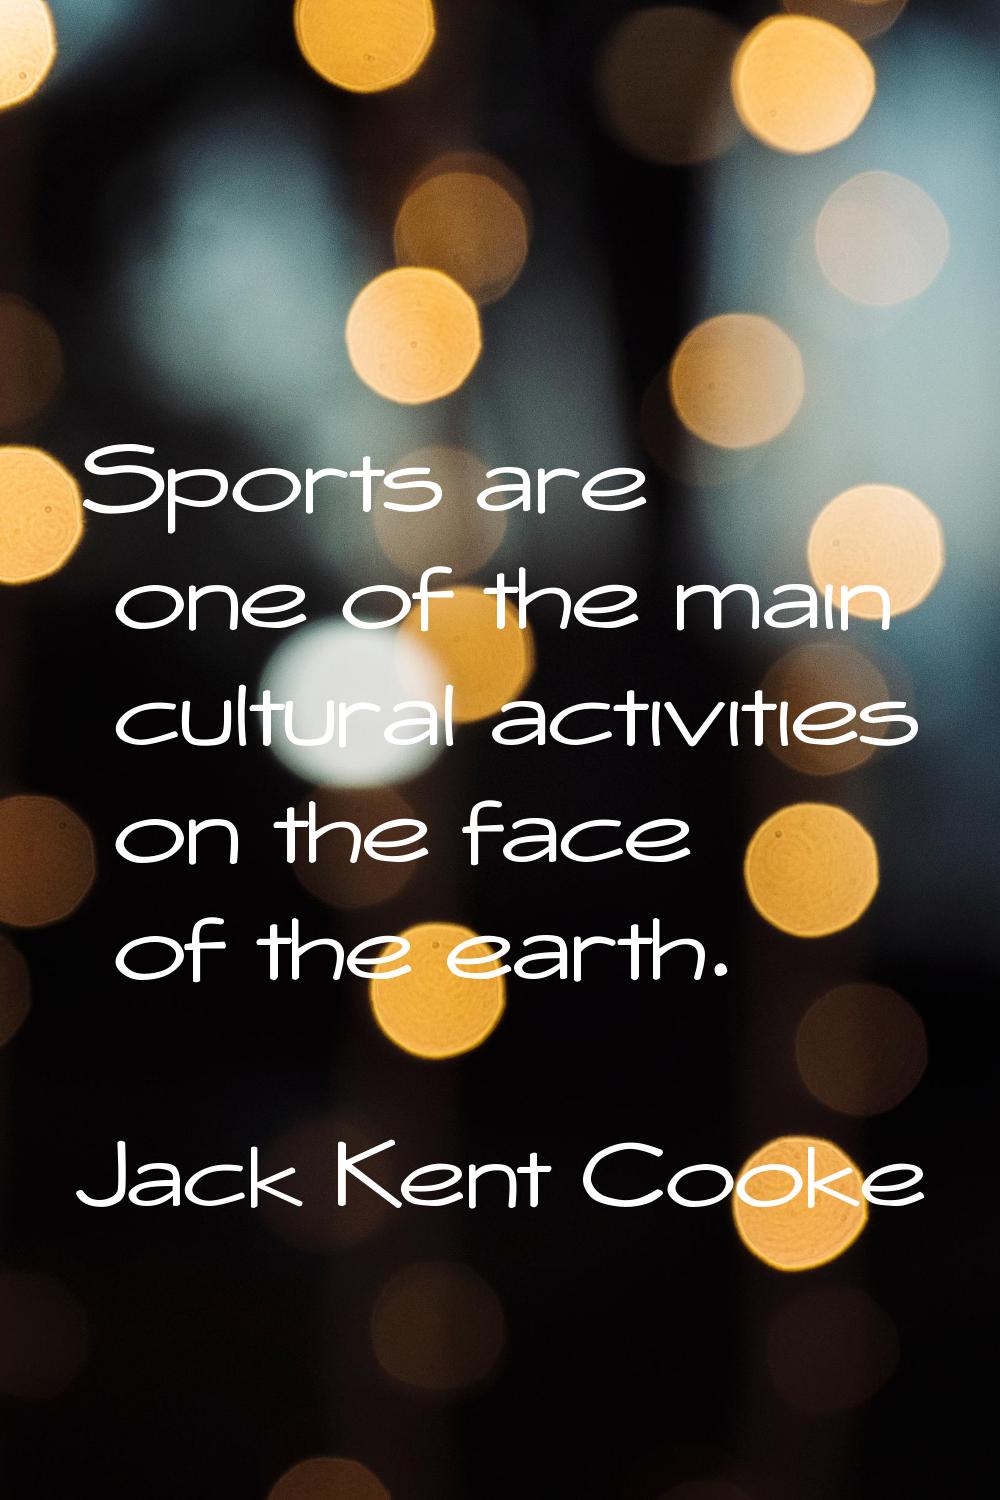 Sports are one of the main cultural activities on the face of the earth.